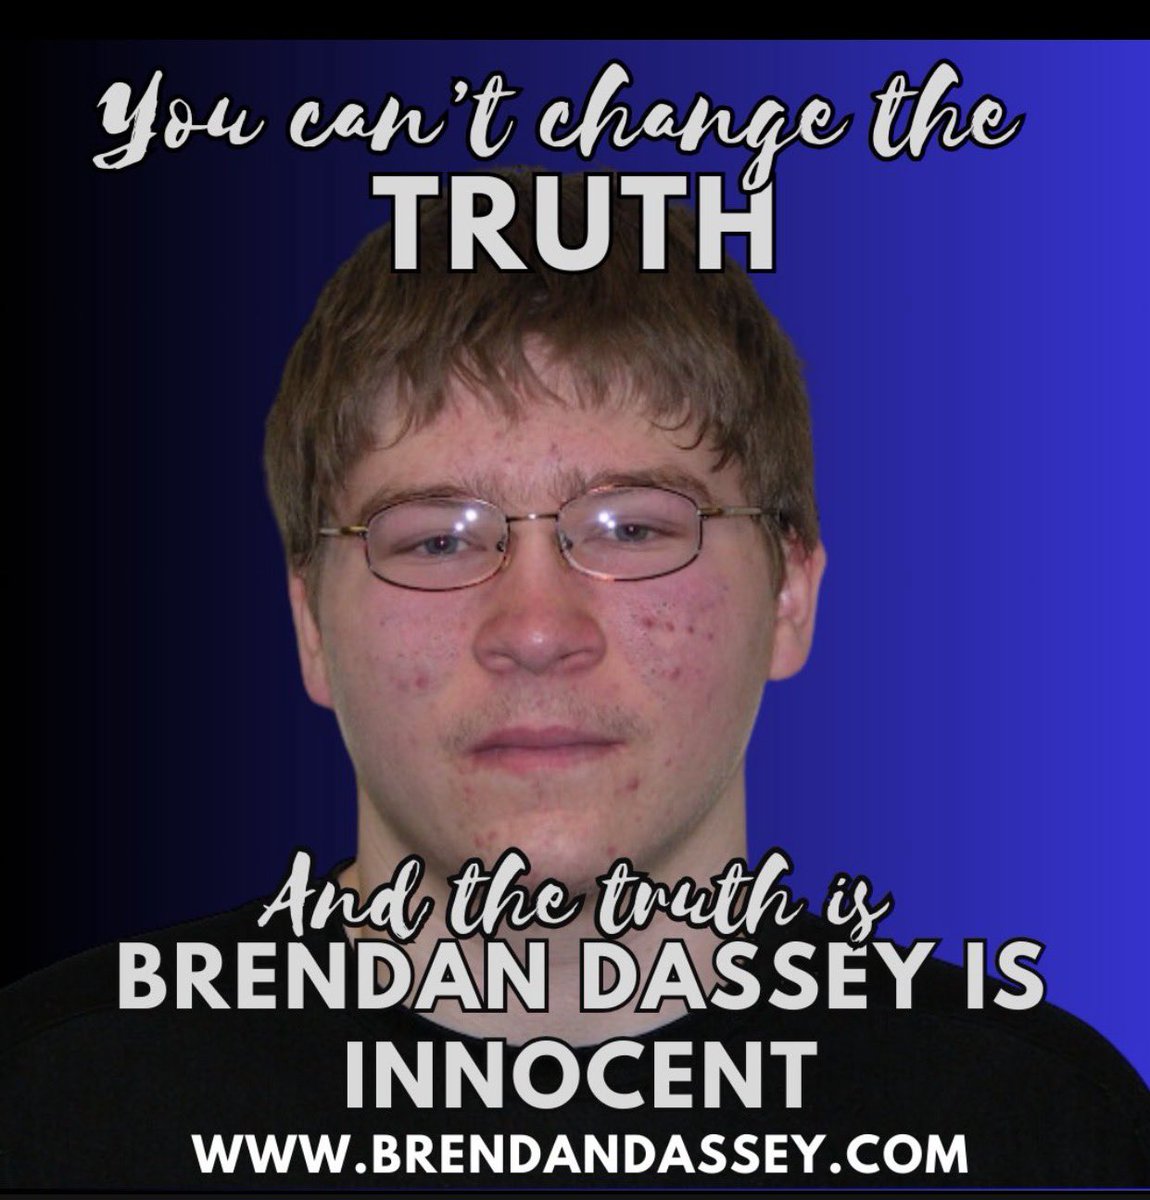 Happy Birthday my dearest Brendan Dassey🎂🎂🎂. We will never stop fighting for your freedom until you are home with your family where you belong ❤️🧡💚. 

#FreeBrendanDassey 
#BringBrendanHome
#IStandWithBrendanDassey